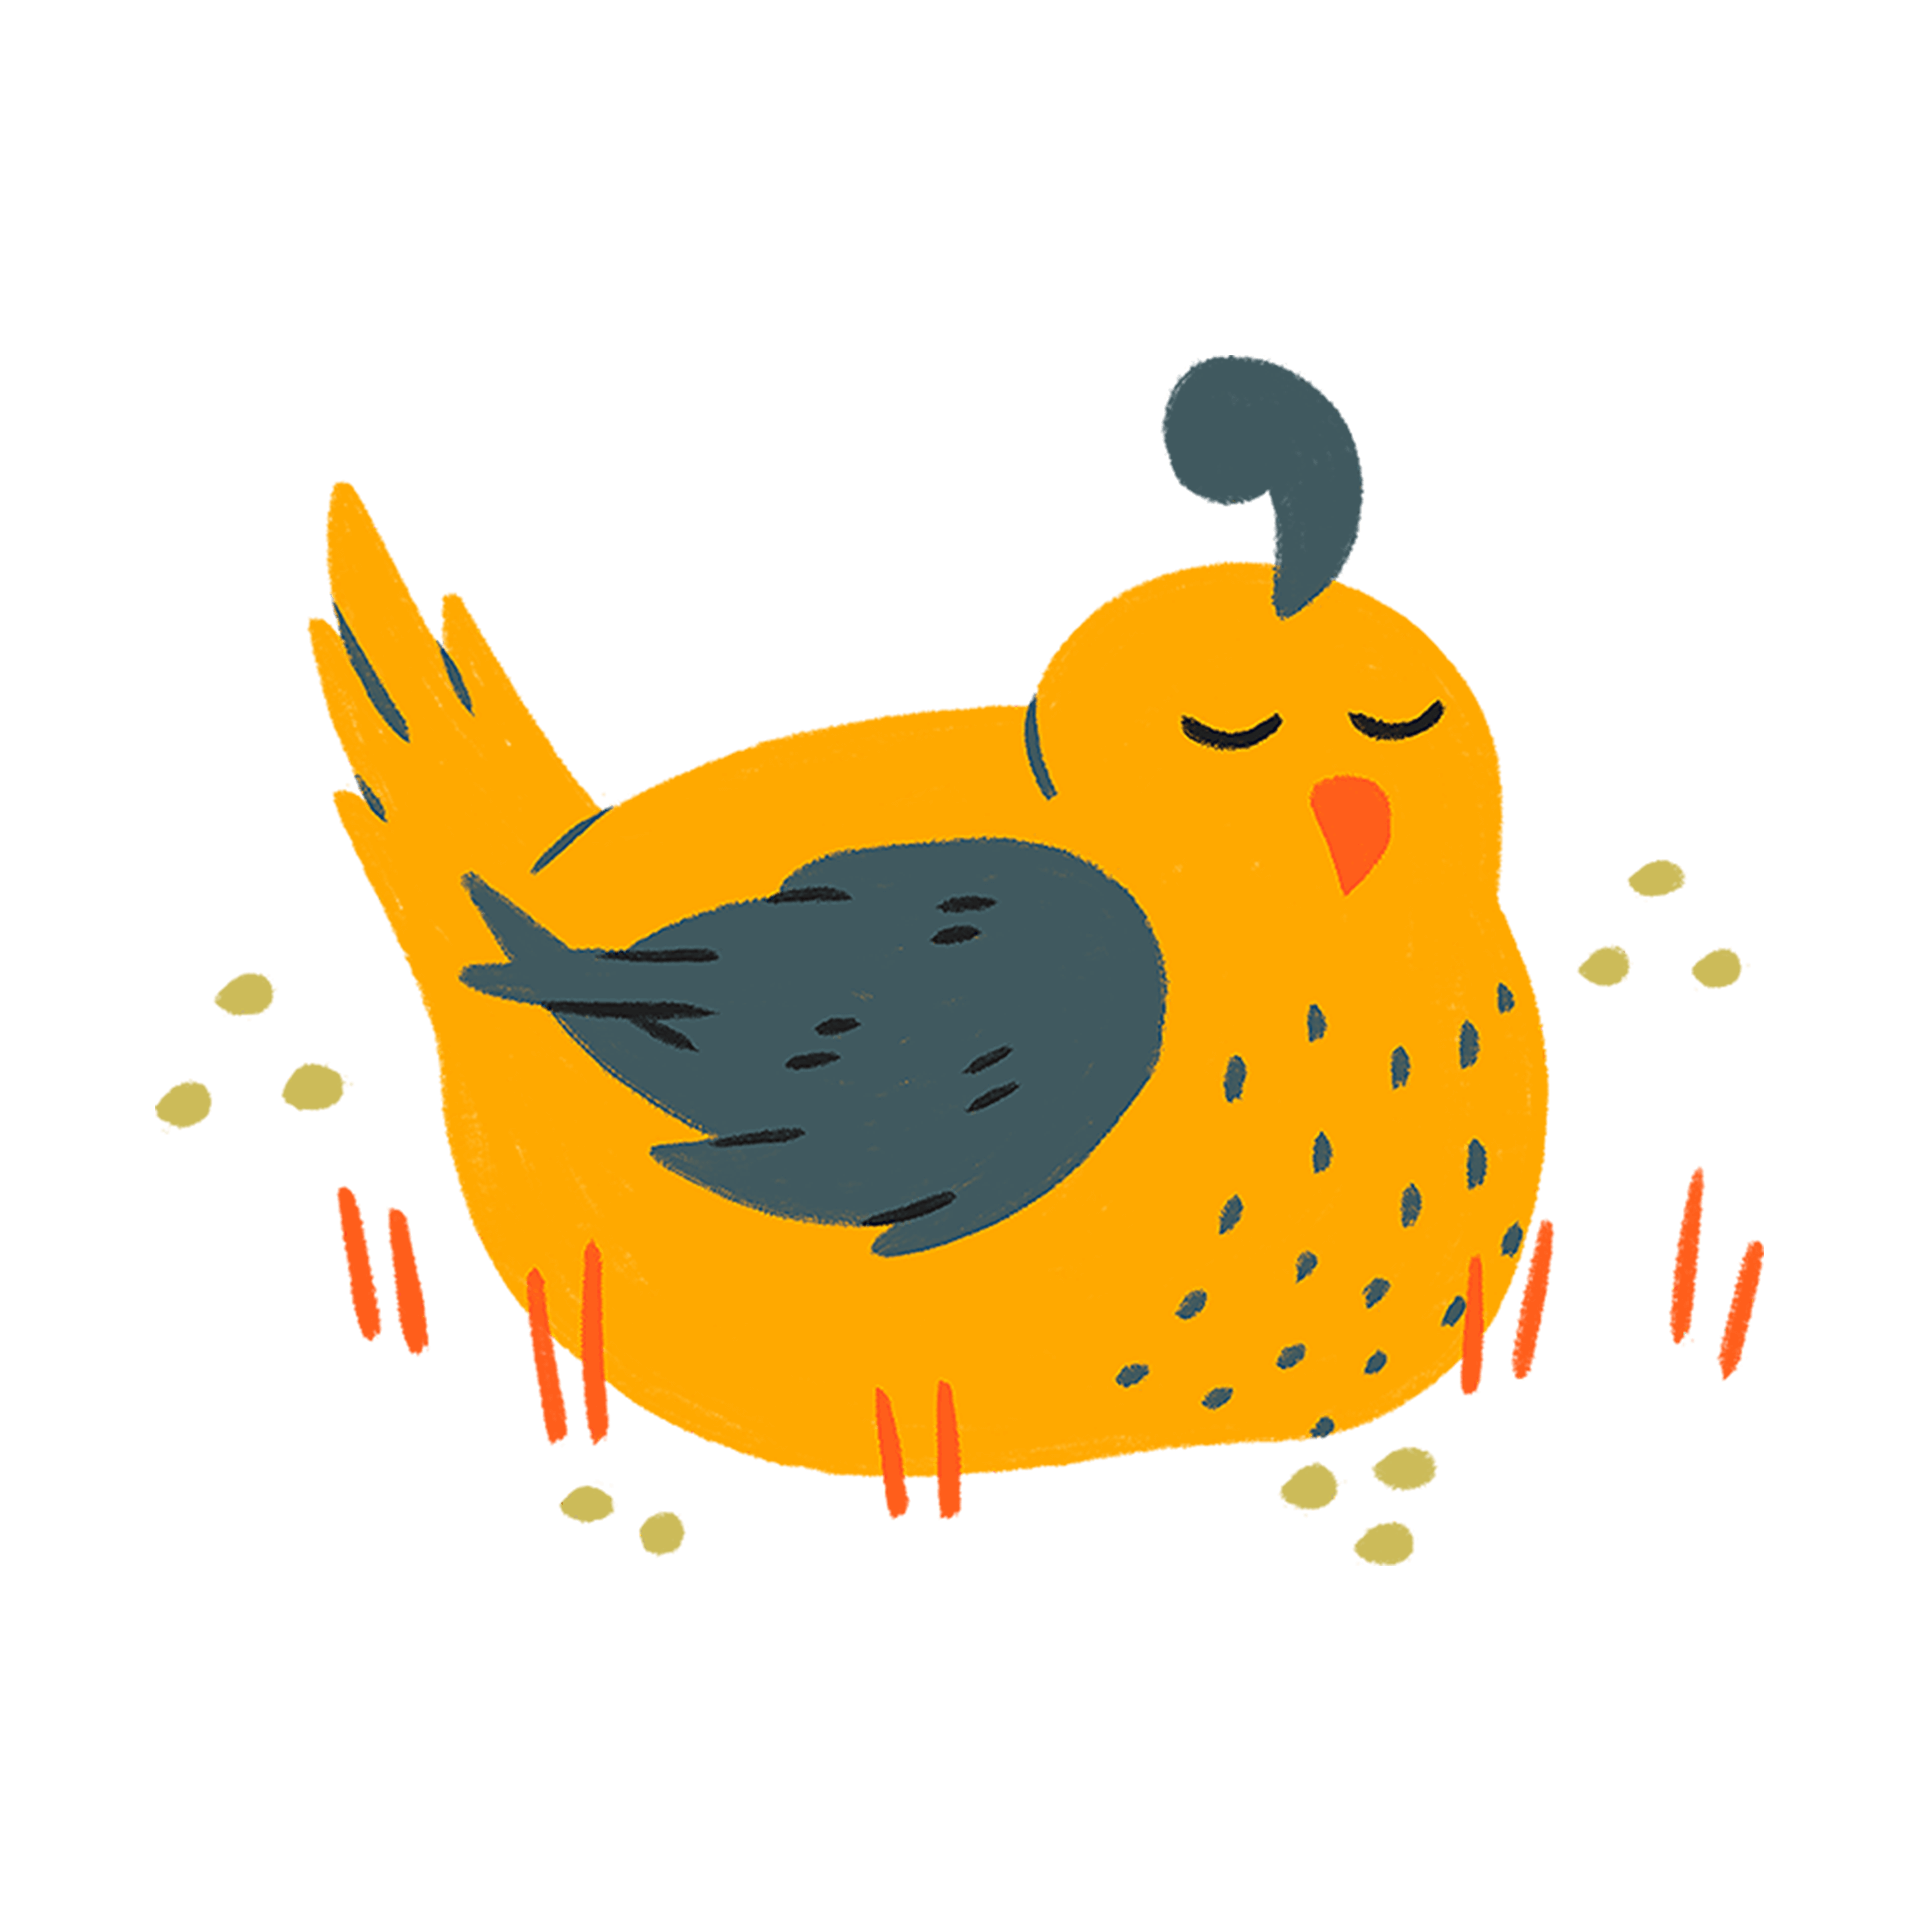 A yellow and blue quail illustration snoozing on the ground